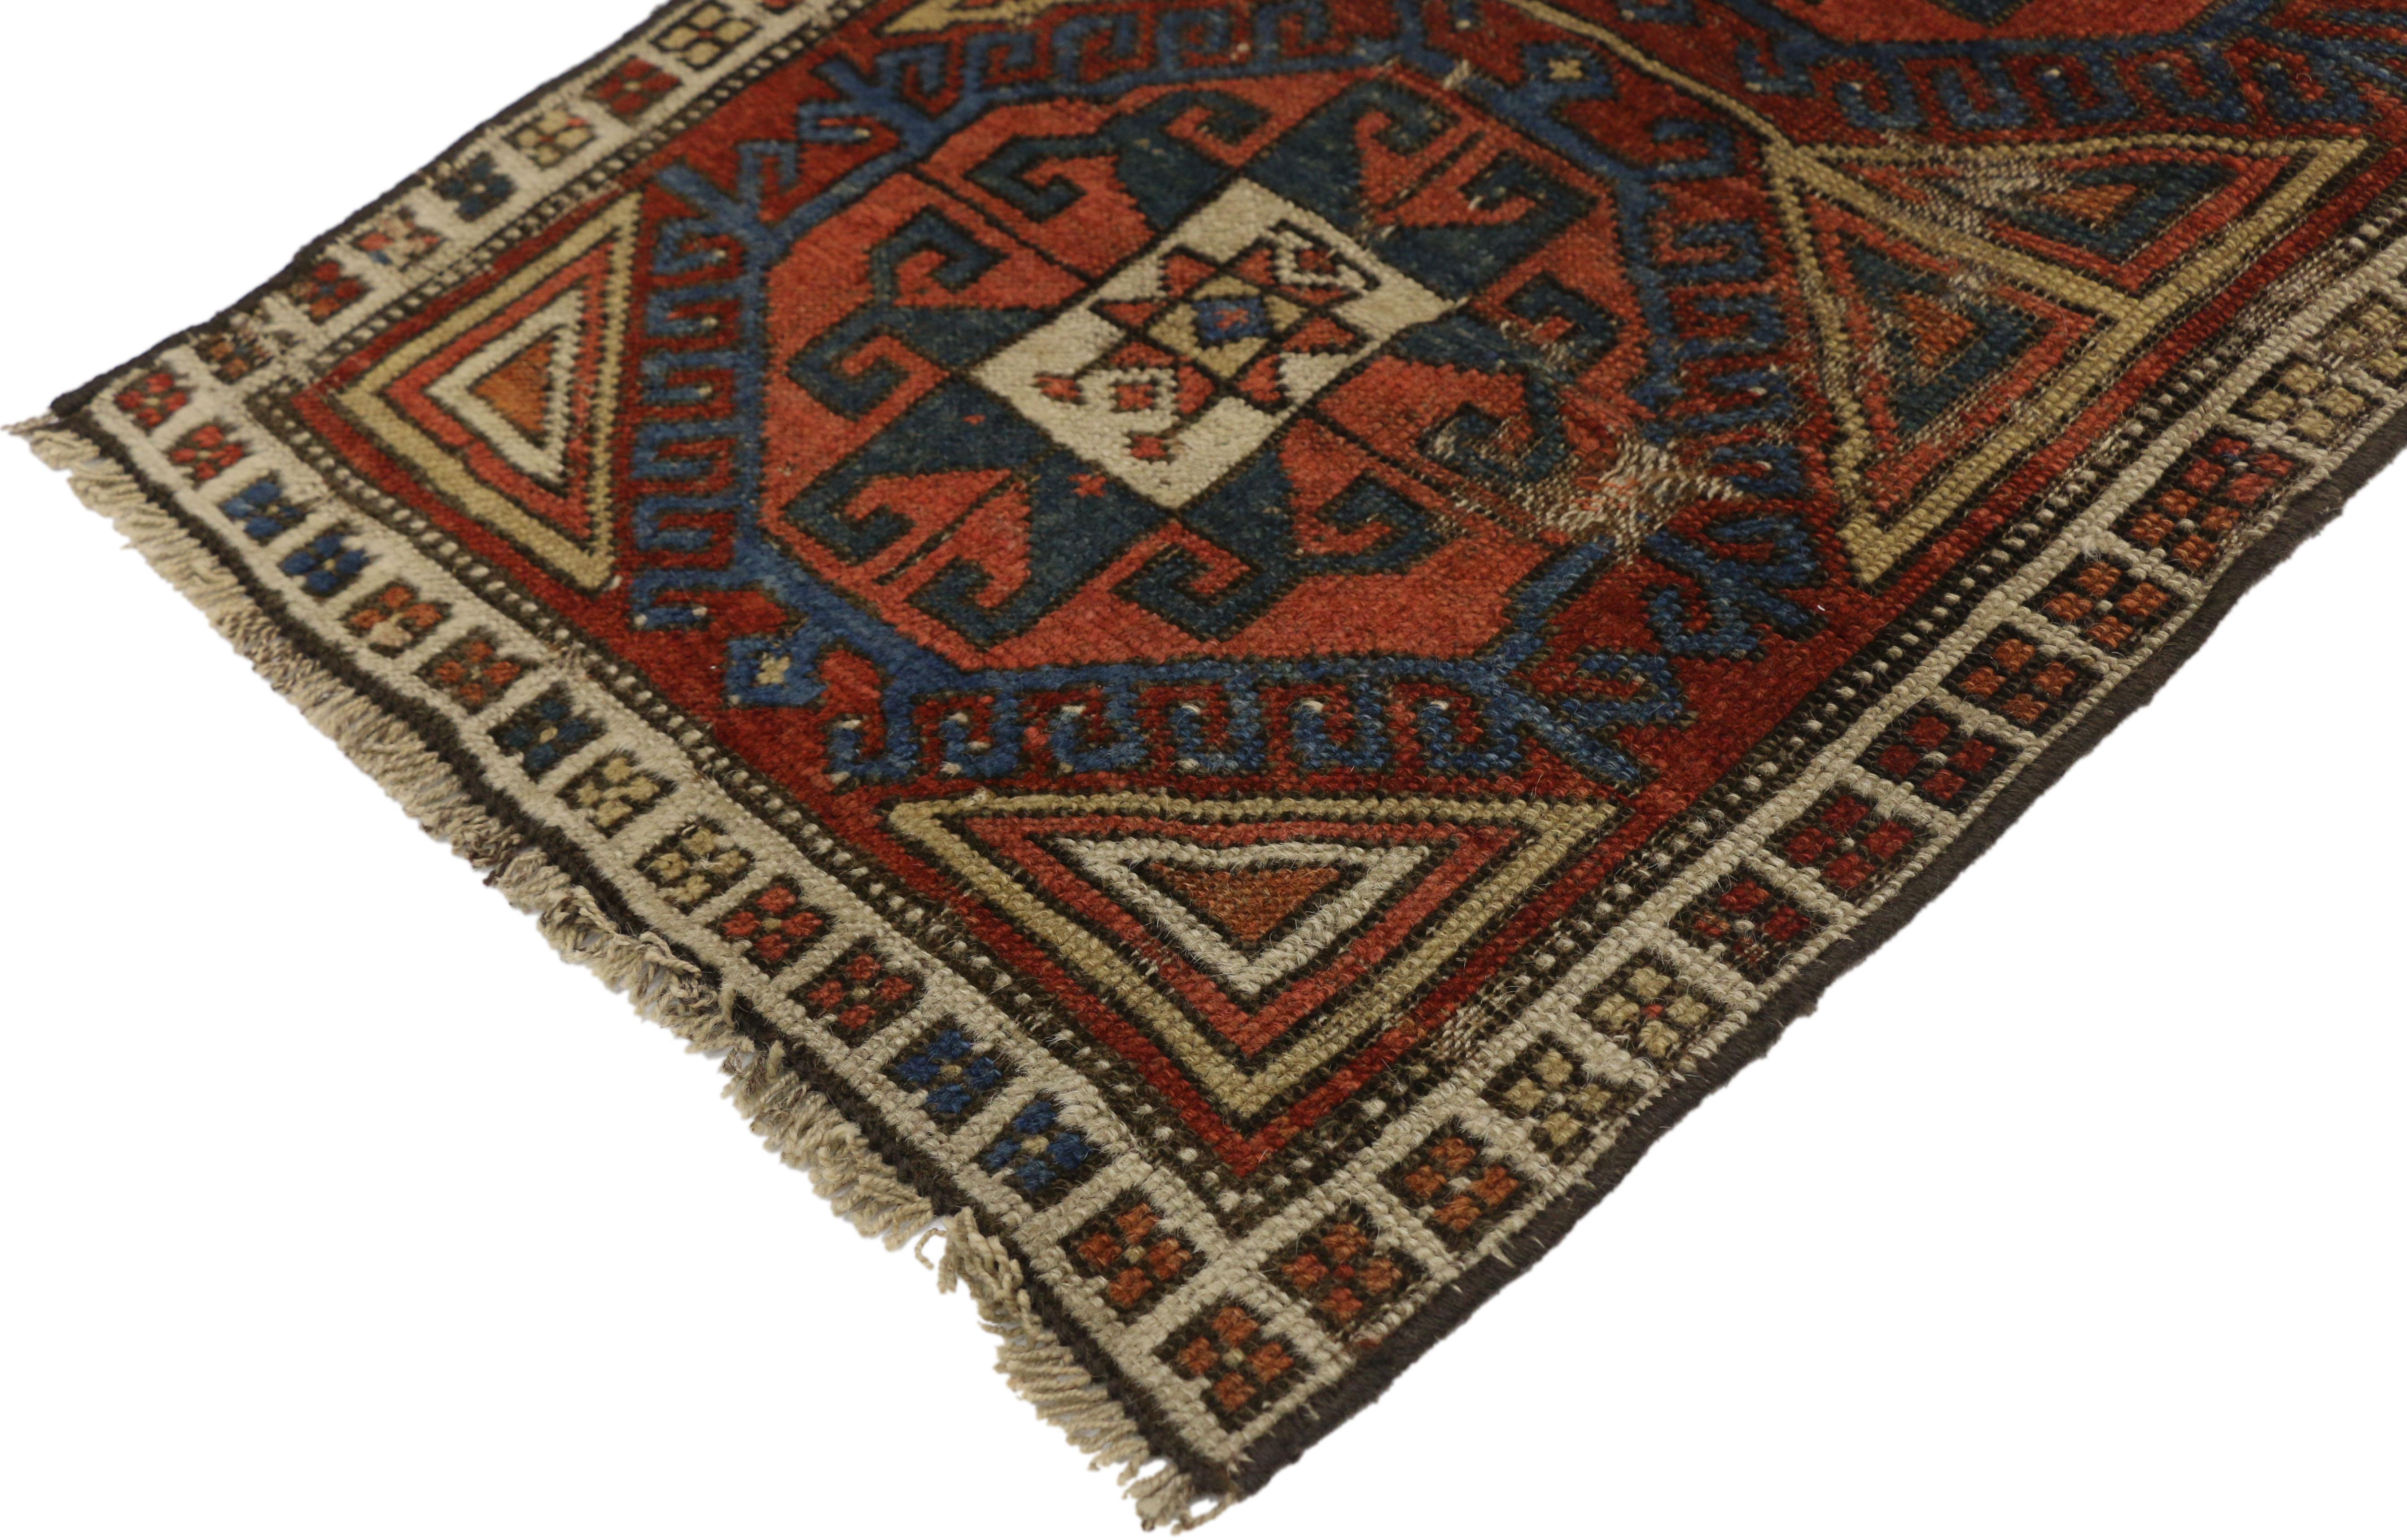 77270 Distressed Antique Caucasian Kazak Scatter Rug with Rustic Tribal Style 01'07 x 02'03. This hand knotted wool distressed antique Caucasian Kazak scatter rug features two large red octagonal guls outlined with royal blue latch-hooks edges. Each